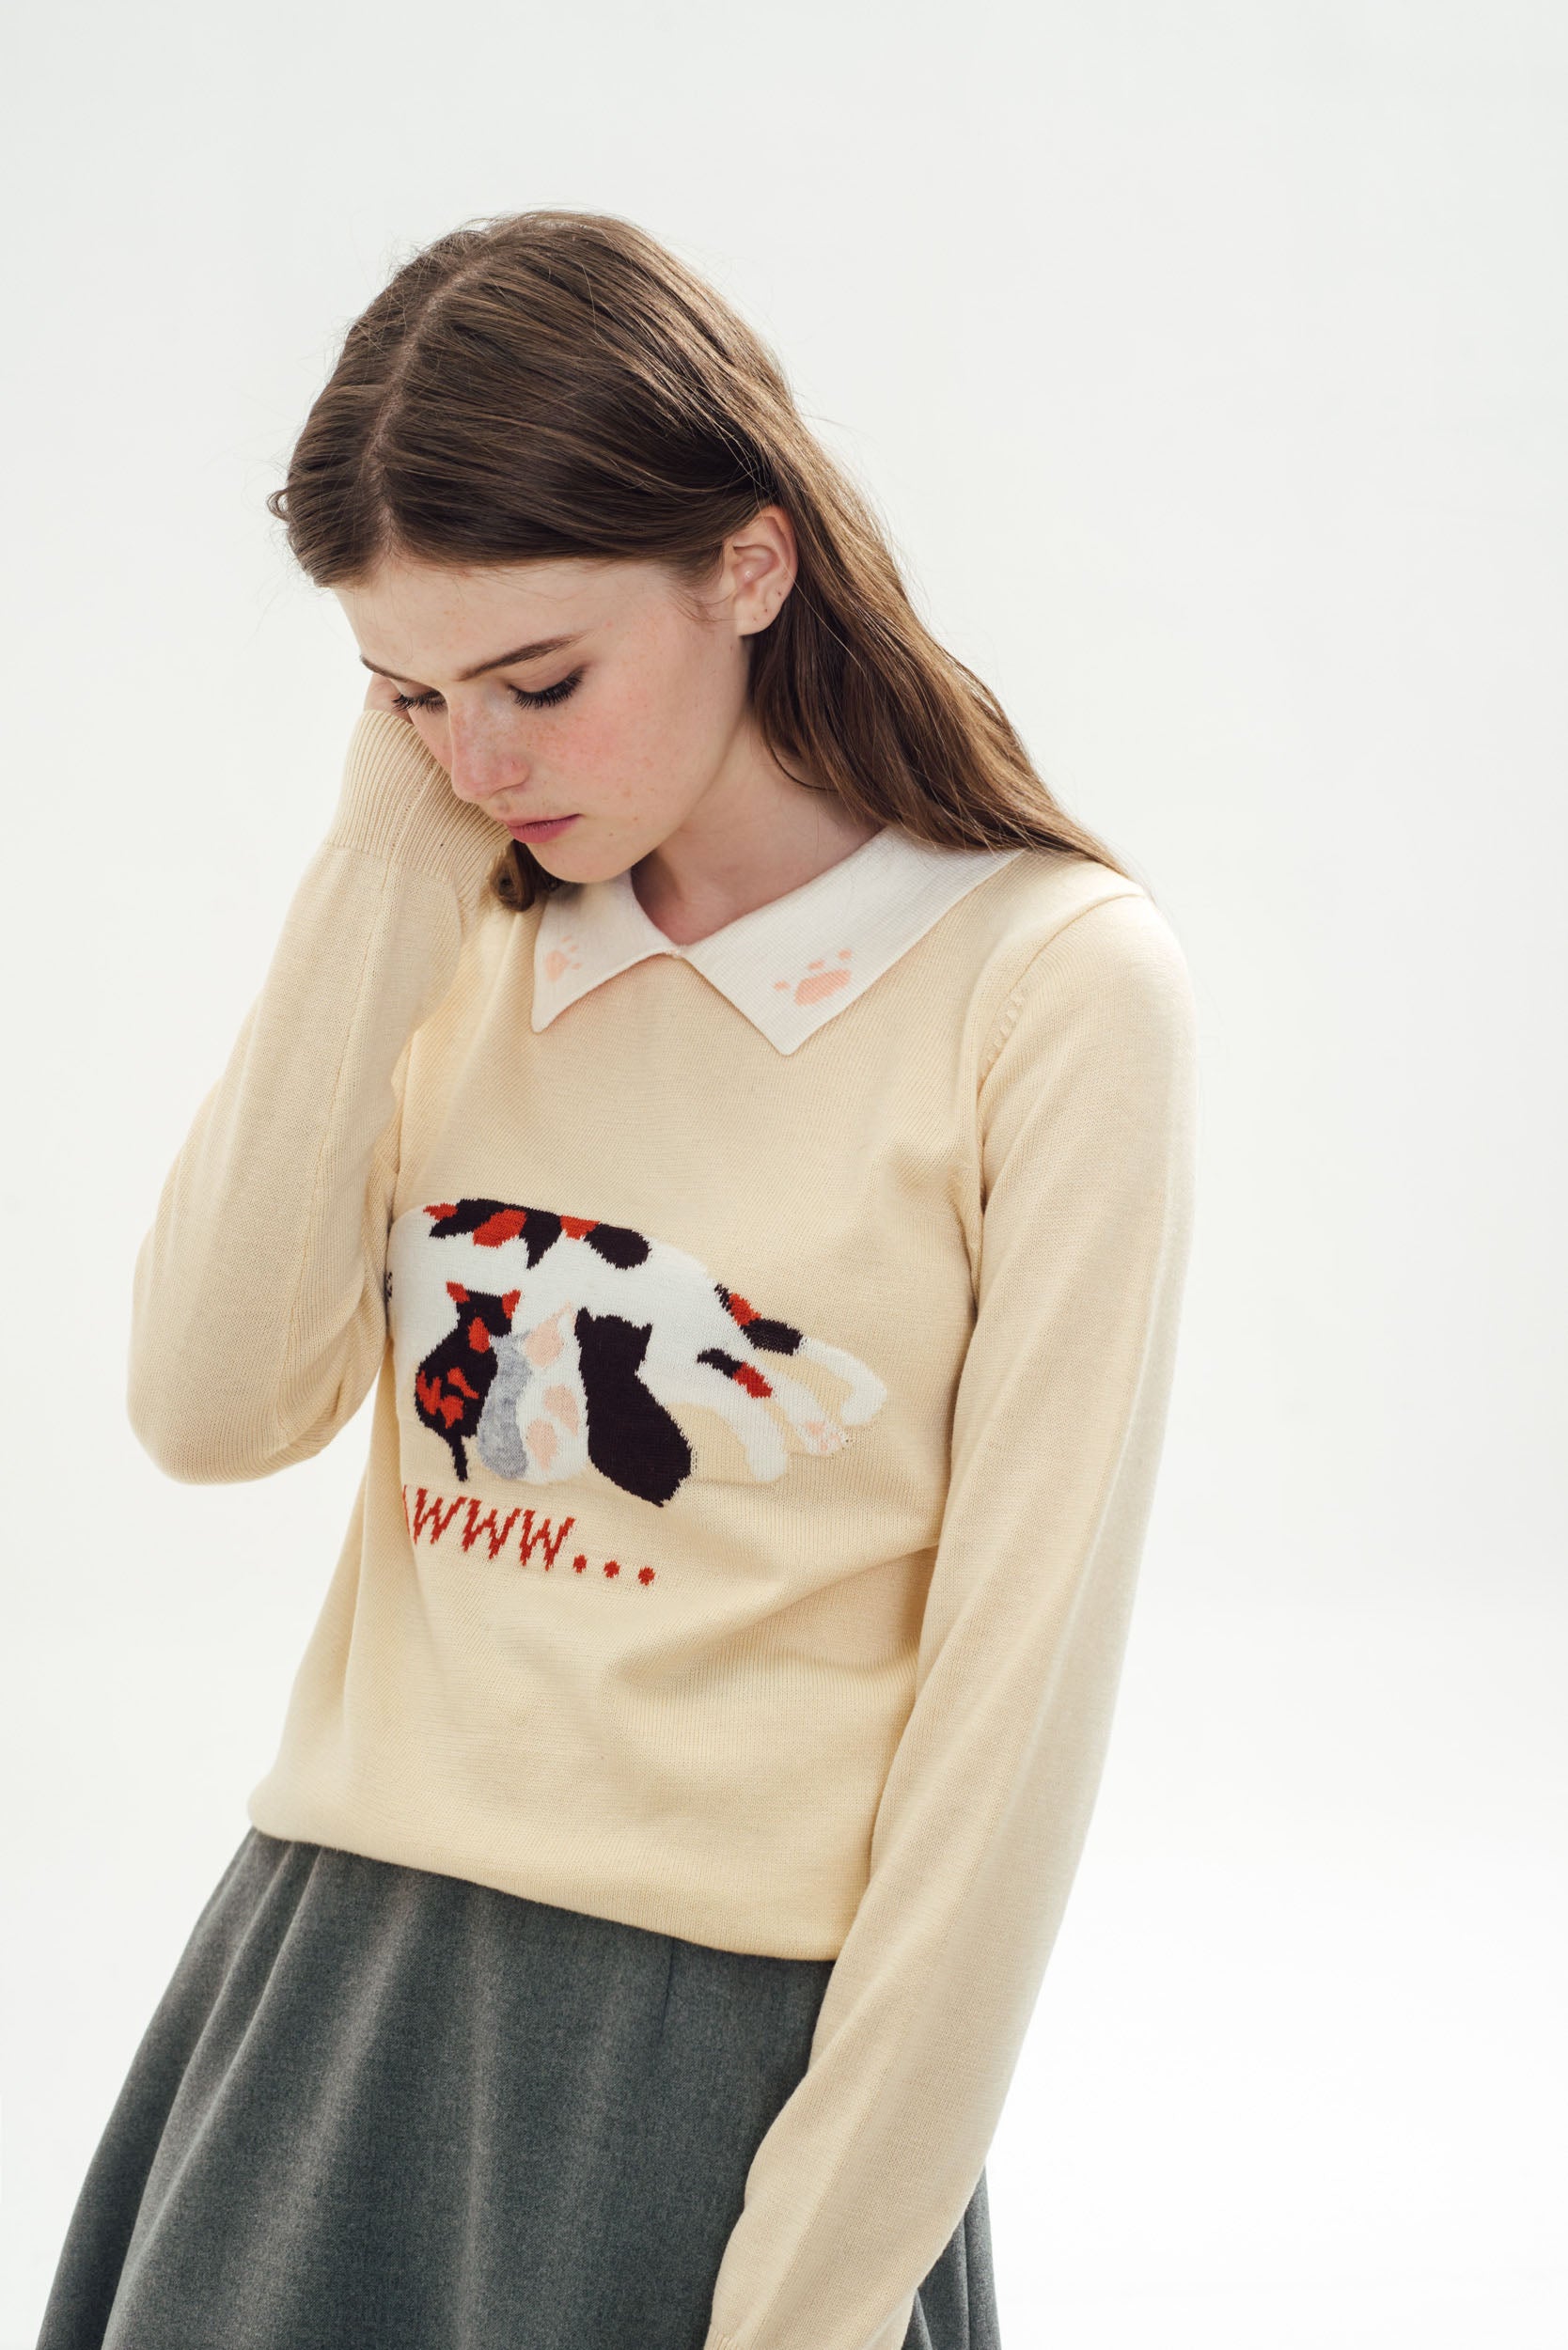 Paws for Thought Jumper (Cream)